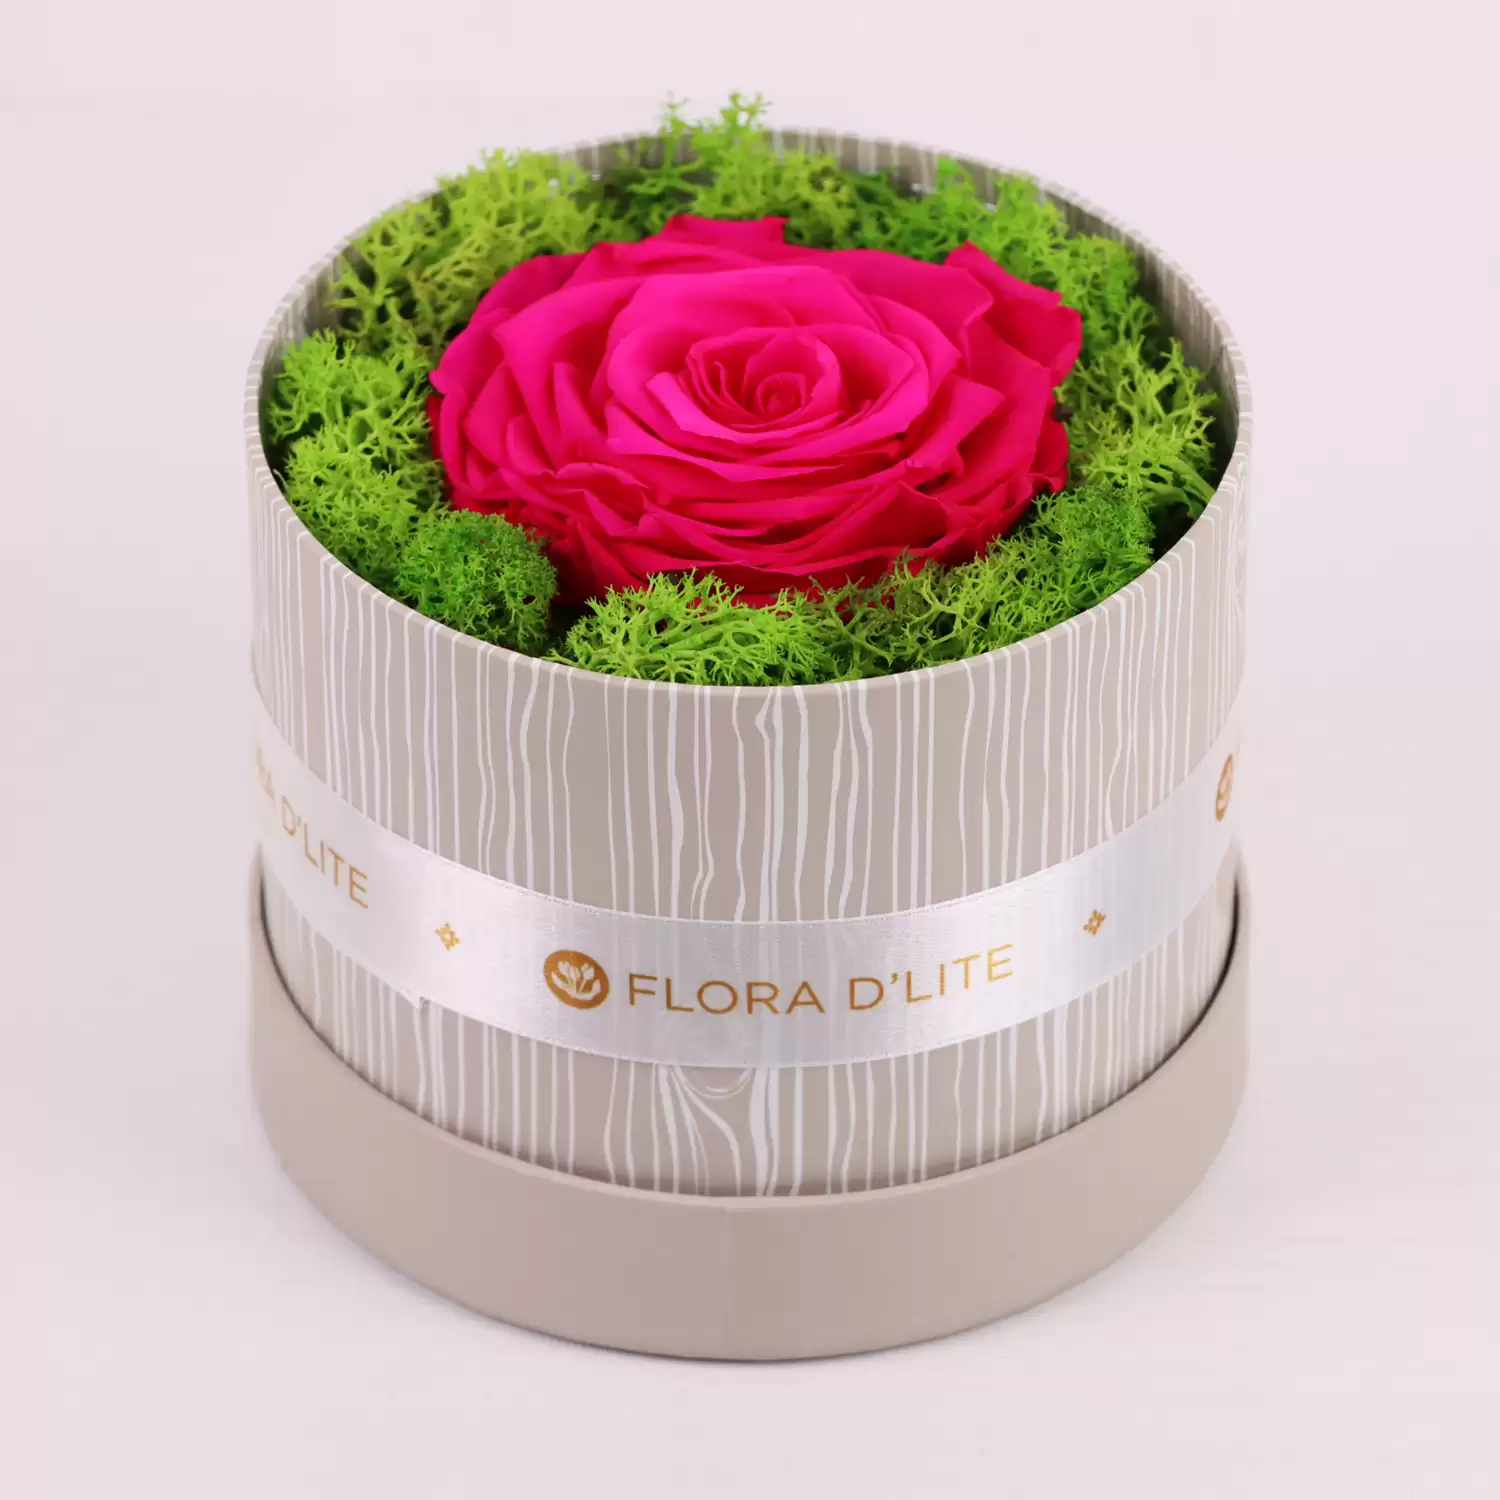 Fushia Infinity Rose | Send Preserved Roses Gifts To Bahrain - Flora D'lite